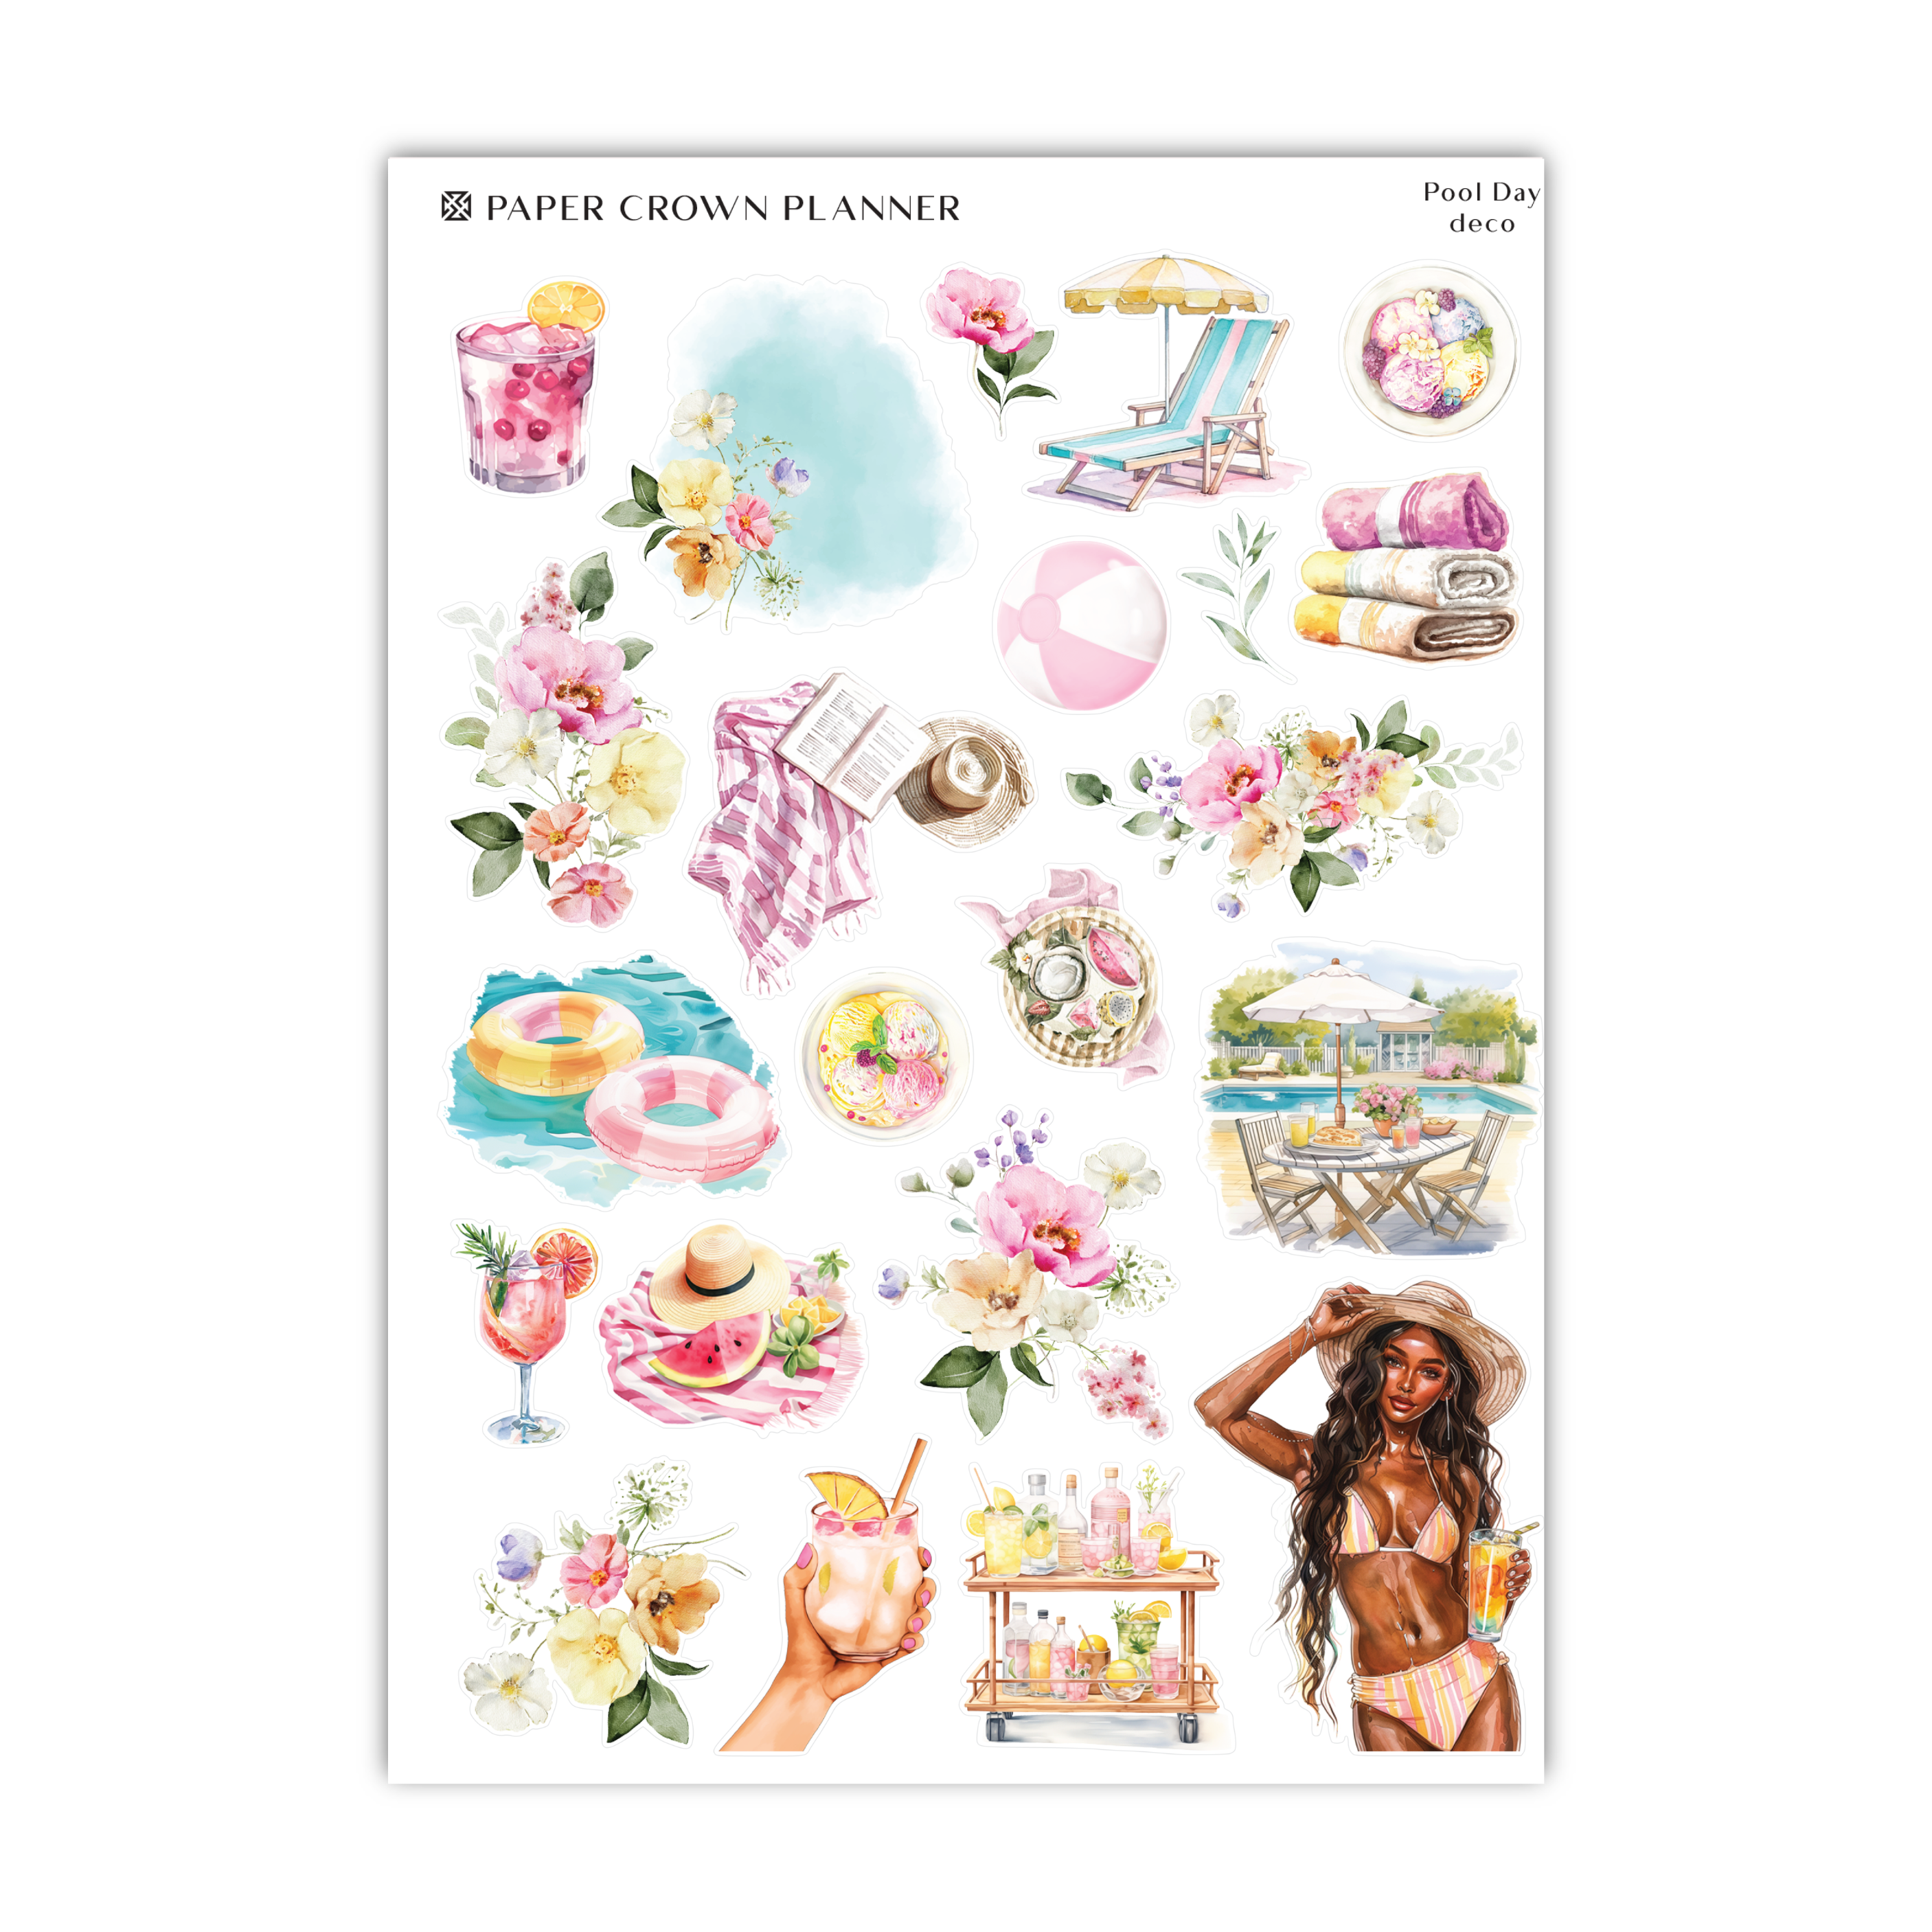 a sticker sheet with a woman and flowers on it